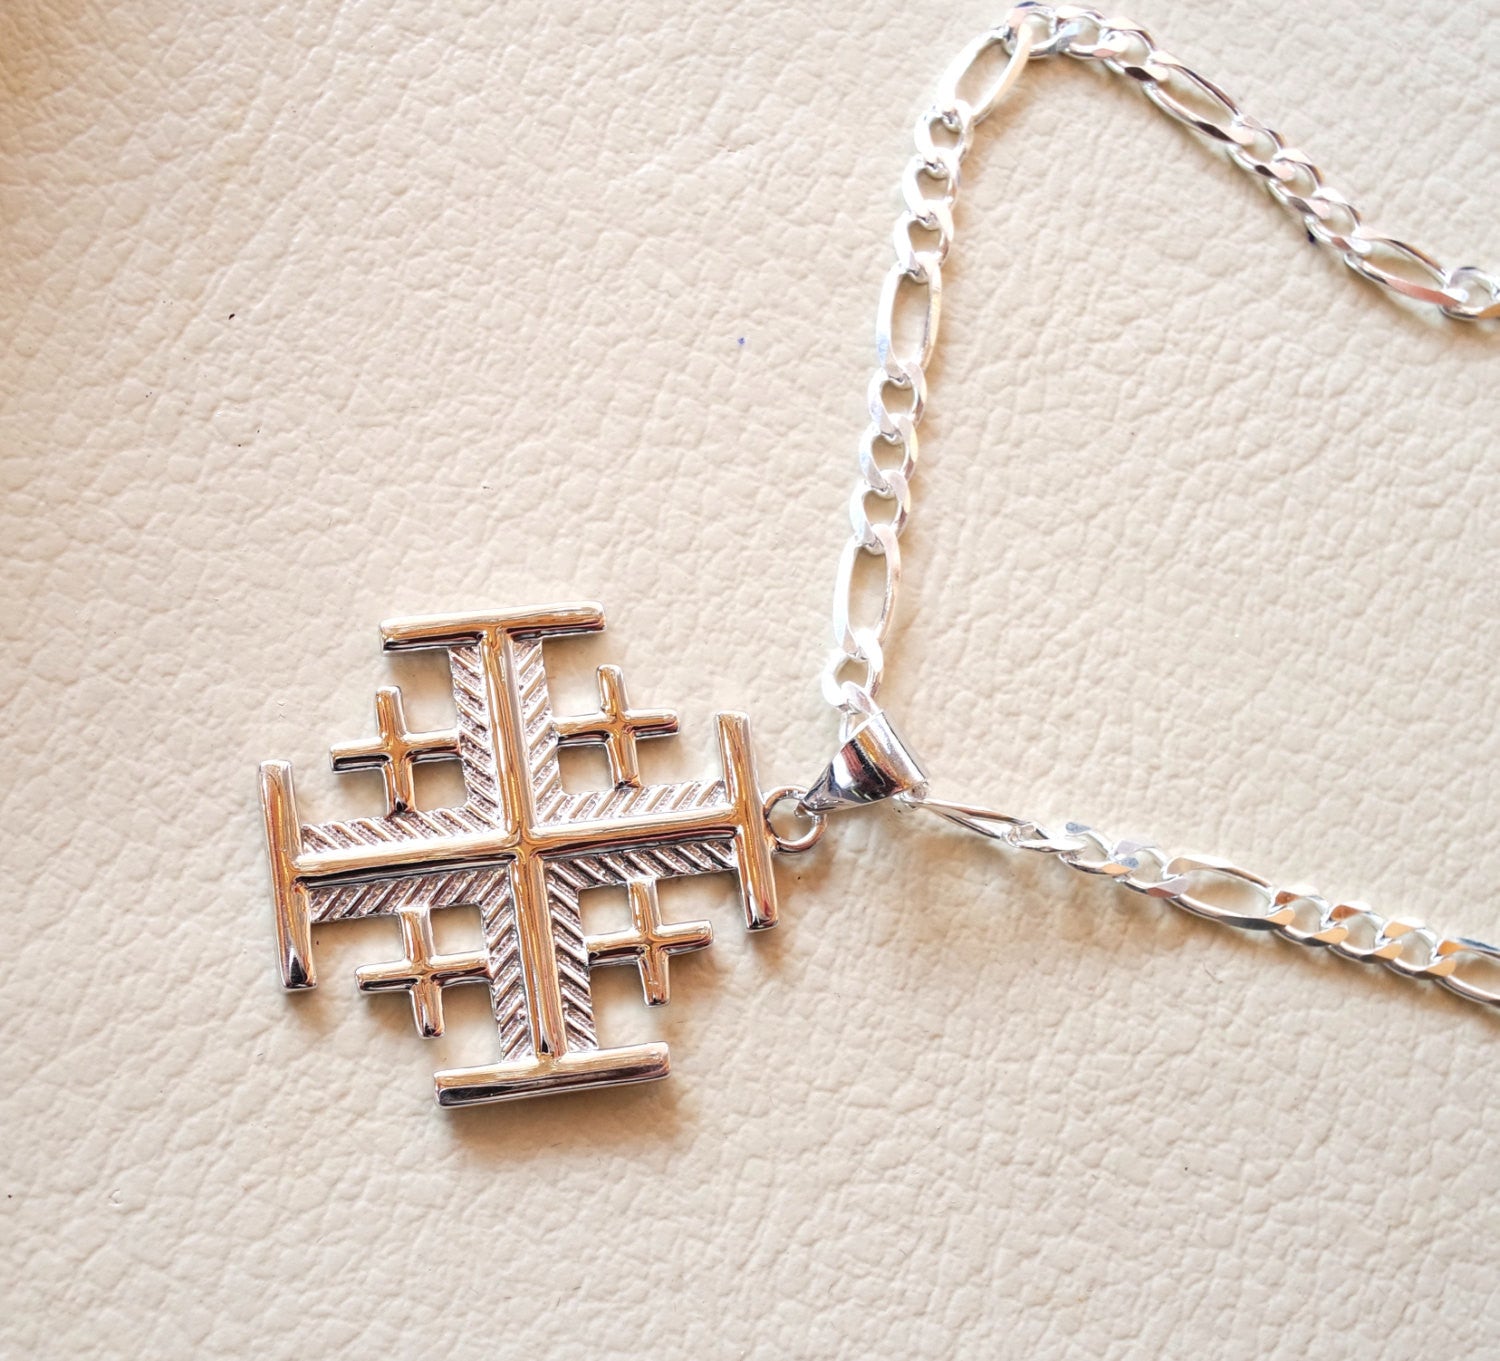 Jerusalem cross pendant with heavy chain sterling silver 925 middle eastern jewelry christianity vintage handmade heavy fast shipping